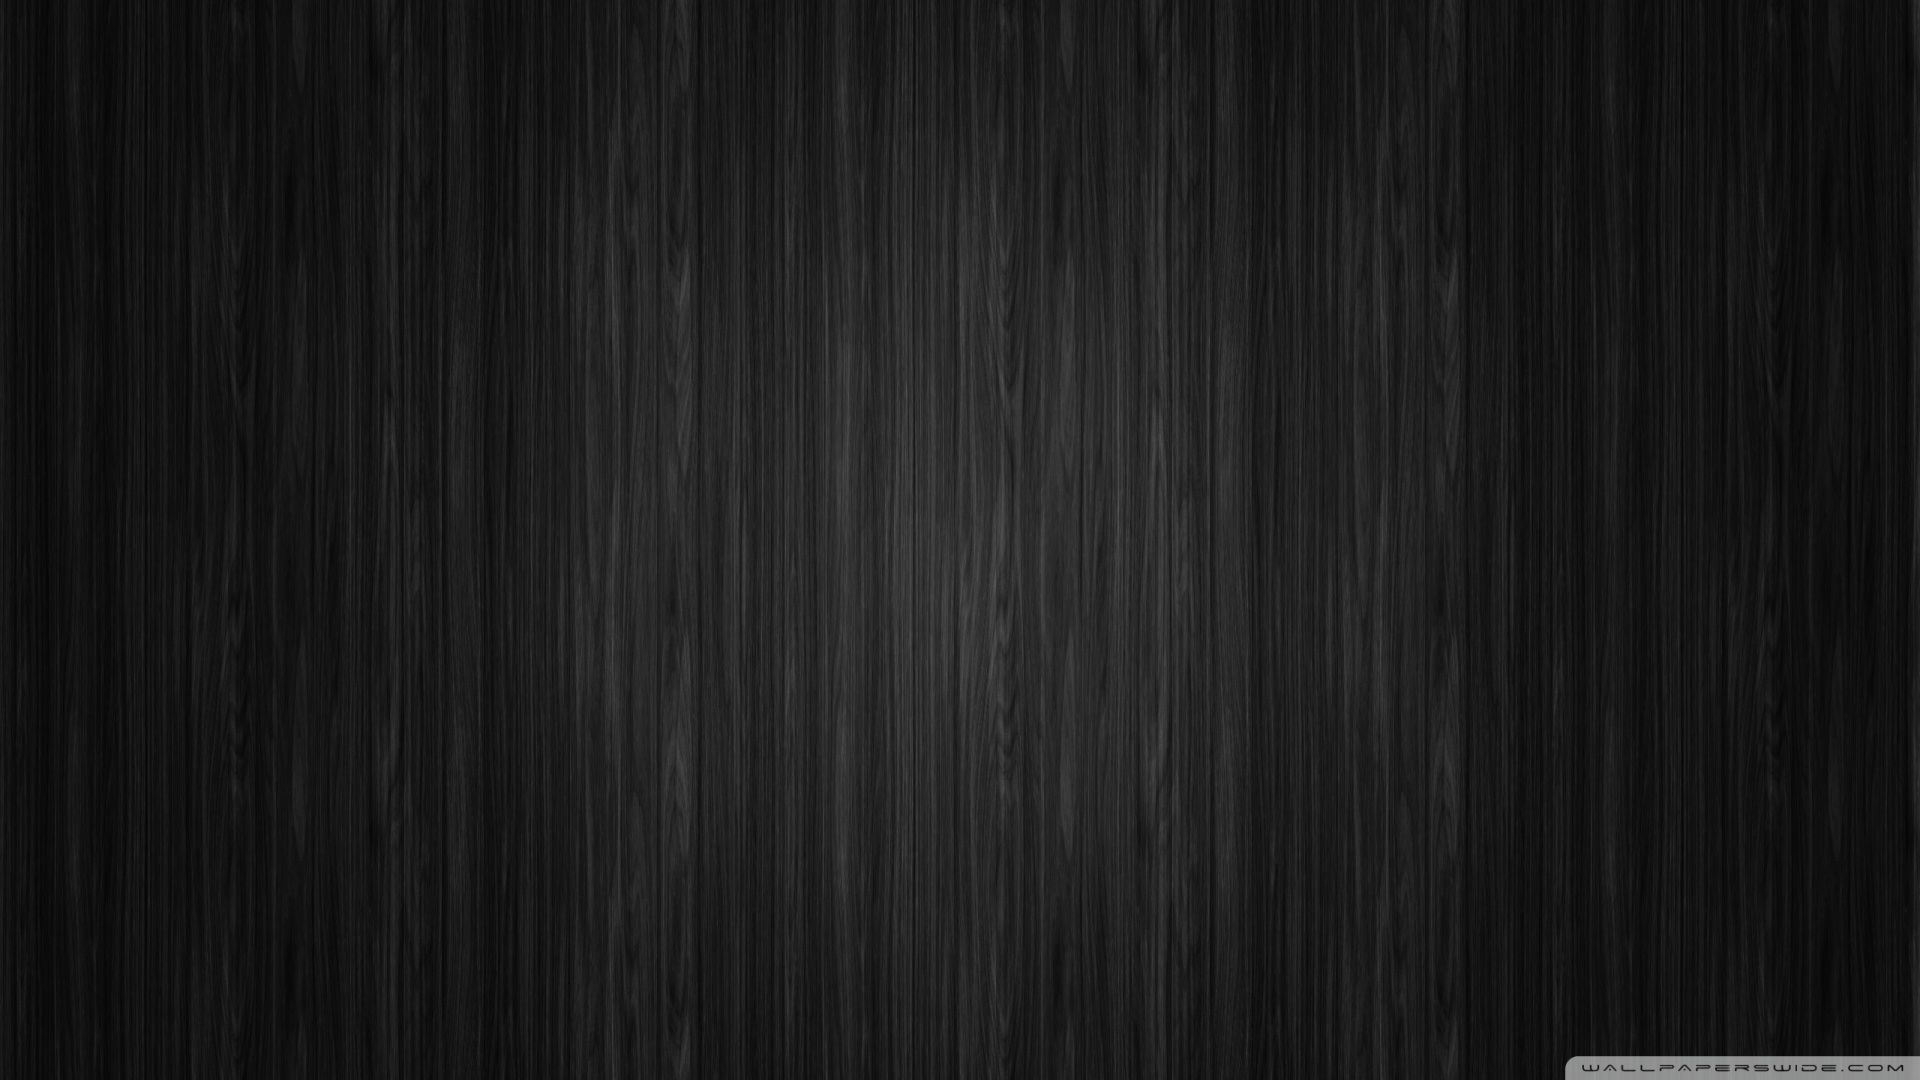 Wood-Background-Pictures-Free-Download | Cornerstone Community ...